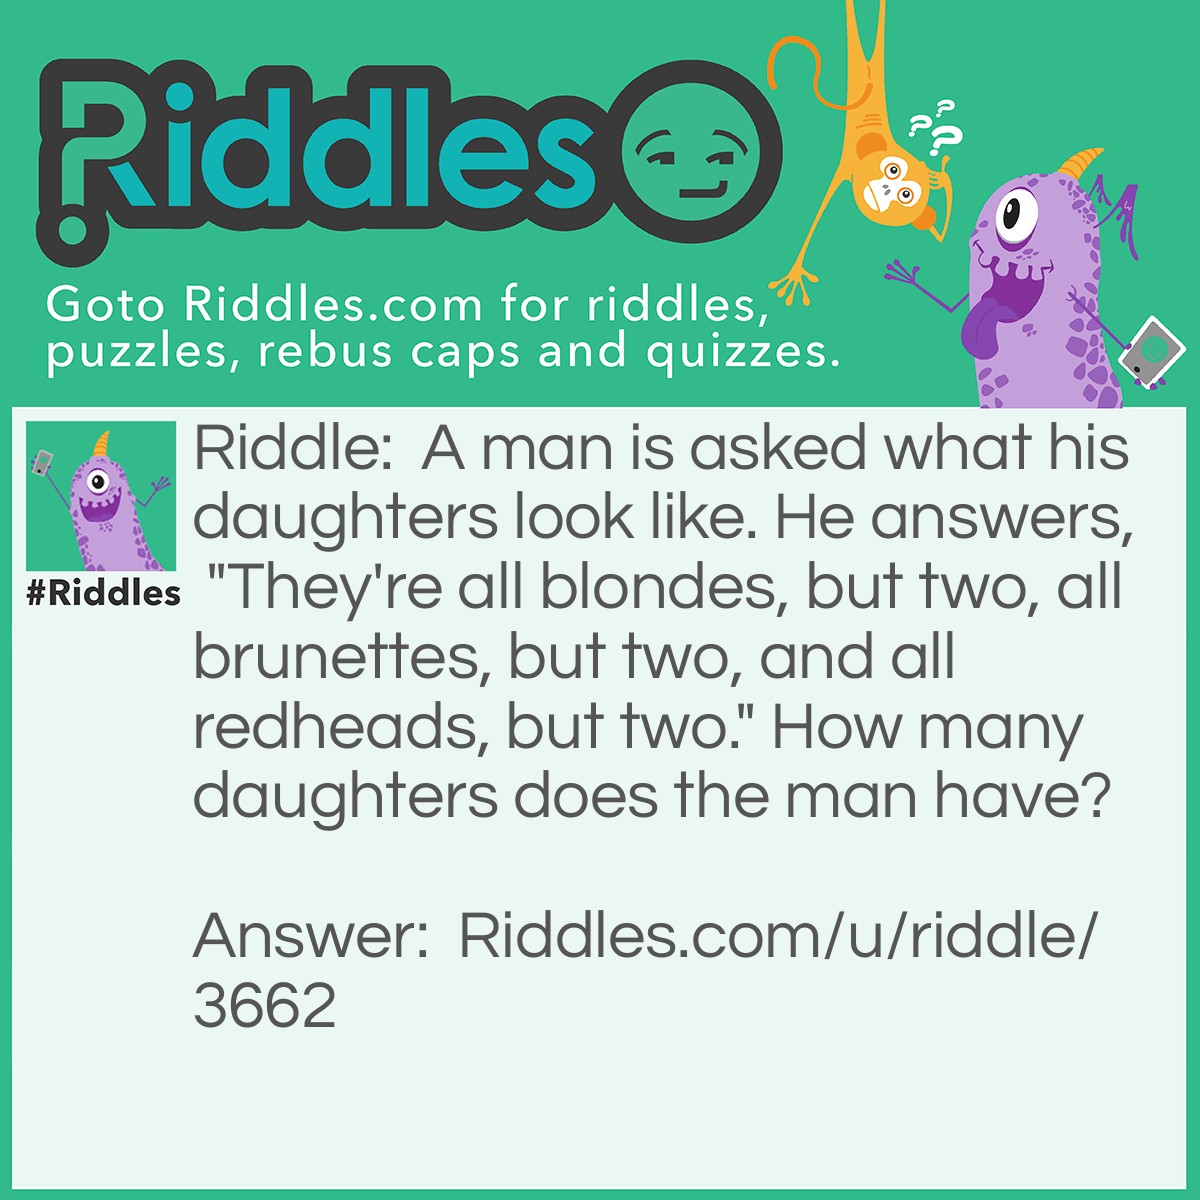 Riddle: A man is asked what his daughters look like. He answers, "They're all blondes, but two, all brunettes, but two, and all redheads, but two." How many daughters does the man have? Answer: Three daughters. One is blonde, one brunette, and one redhead.